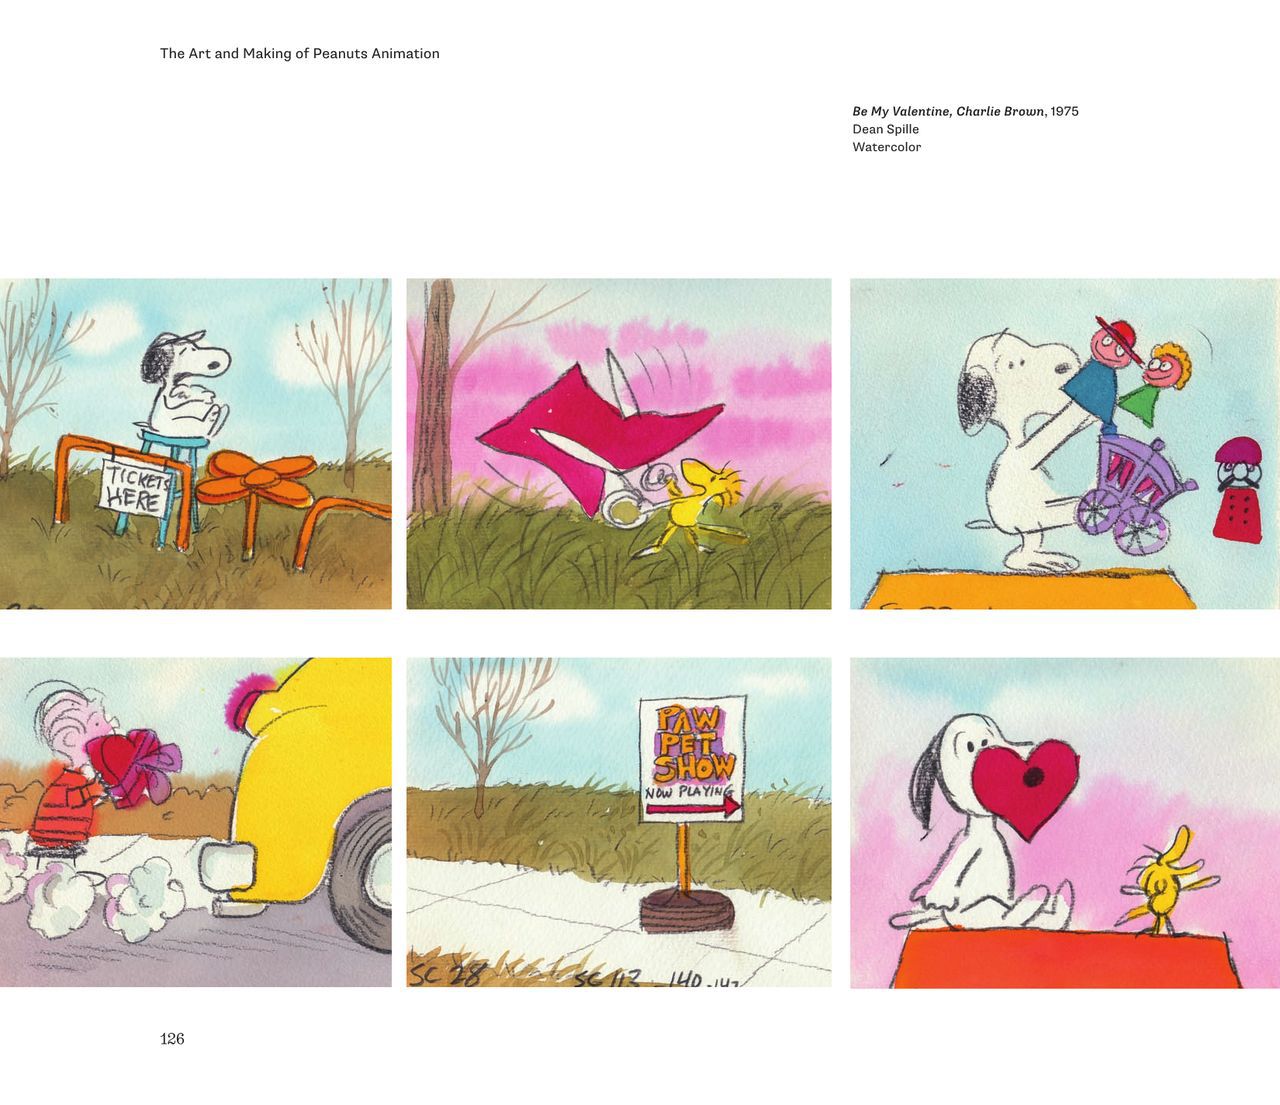 The Art and Making of Peanuts Animation 130